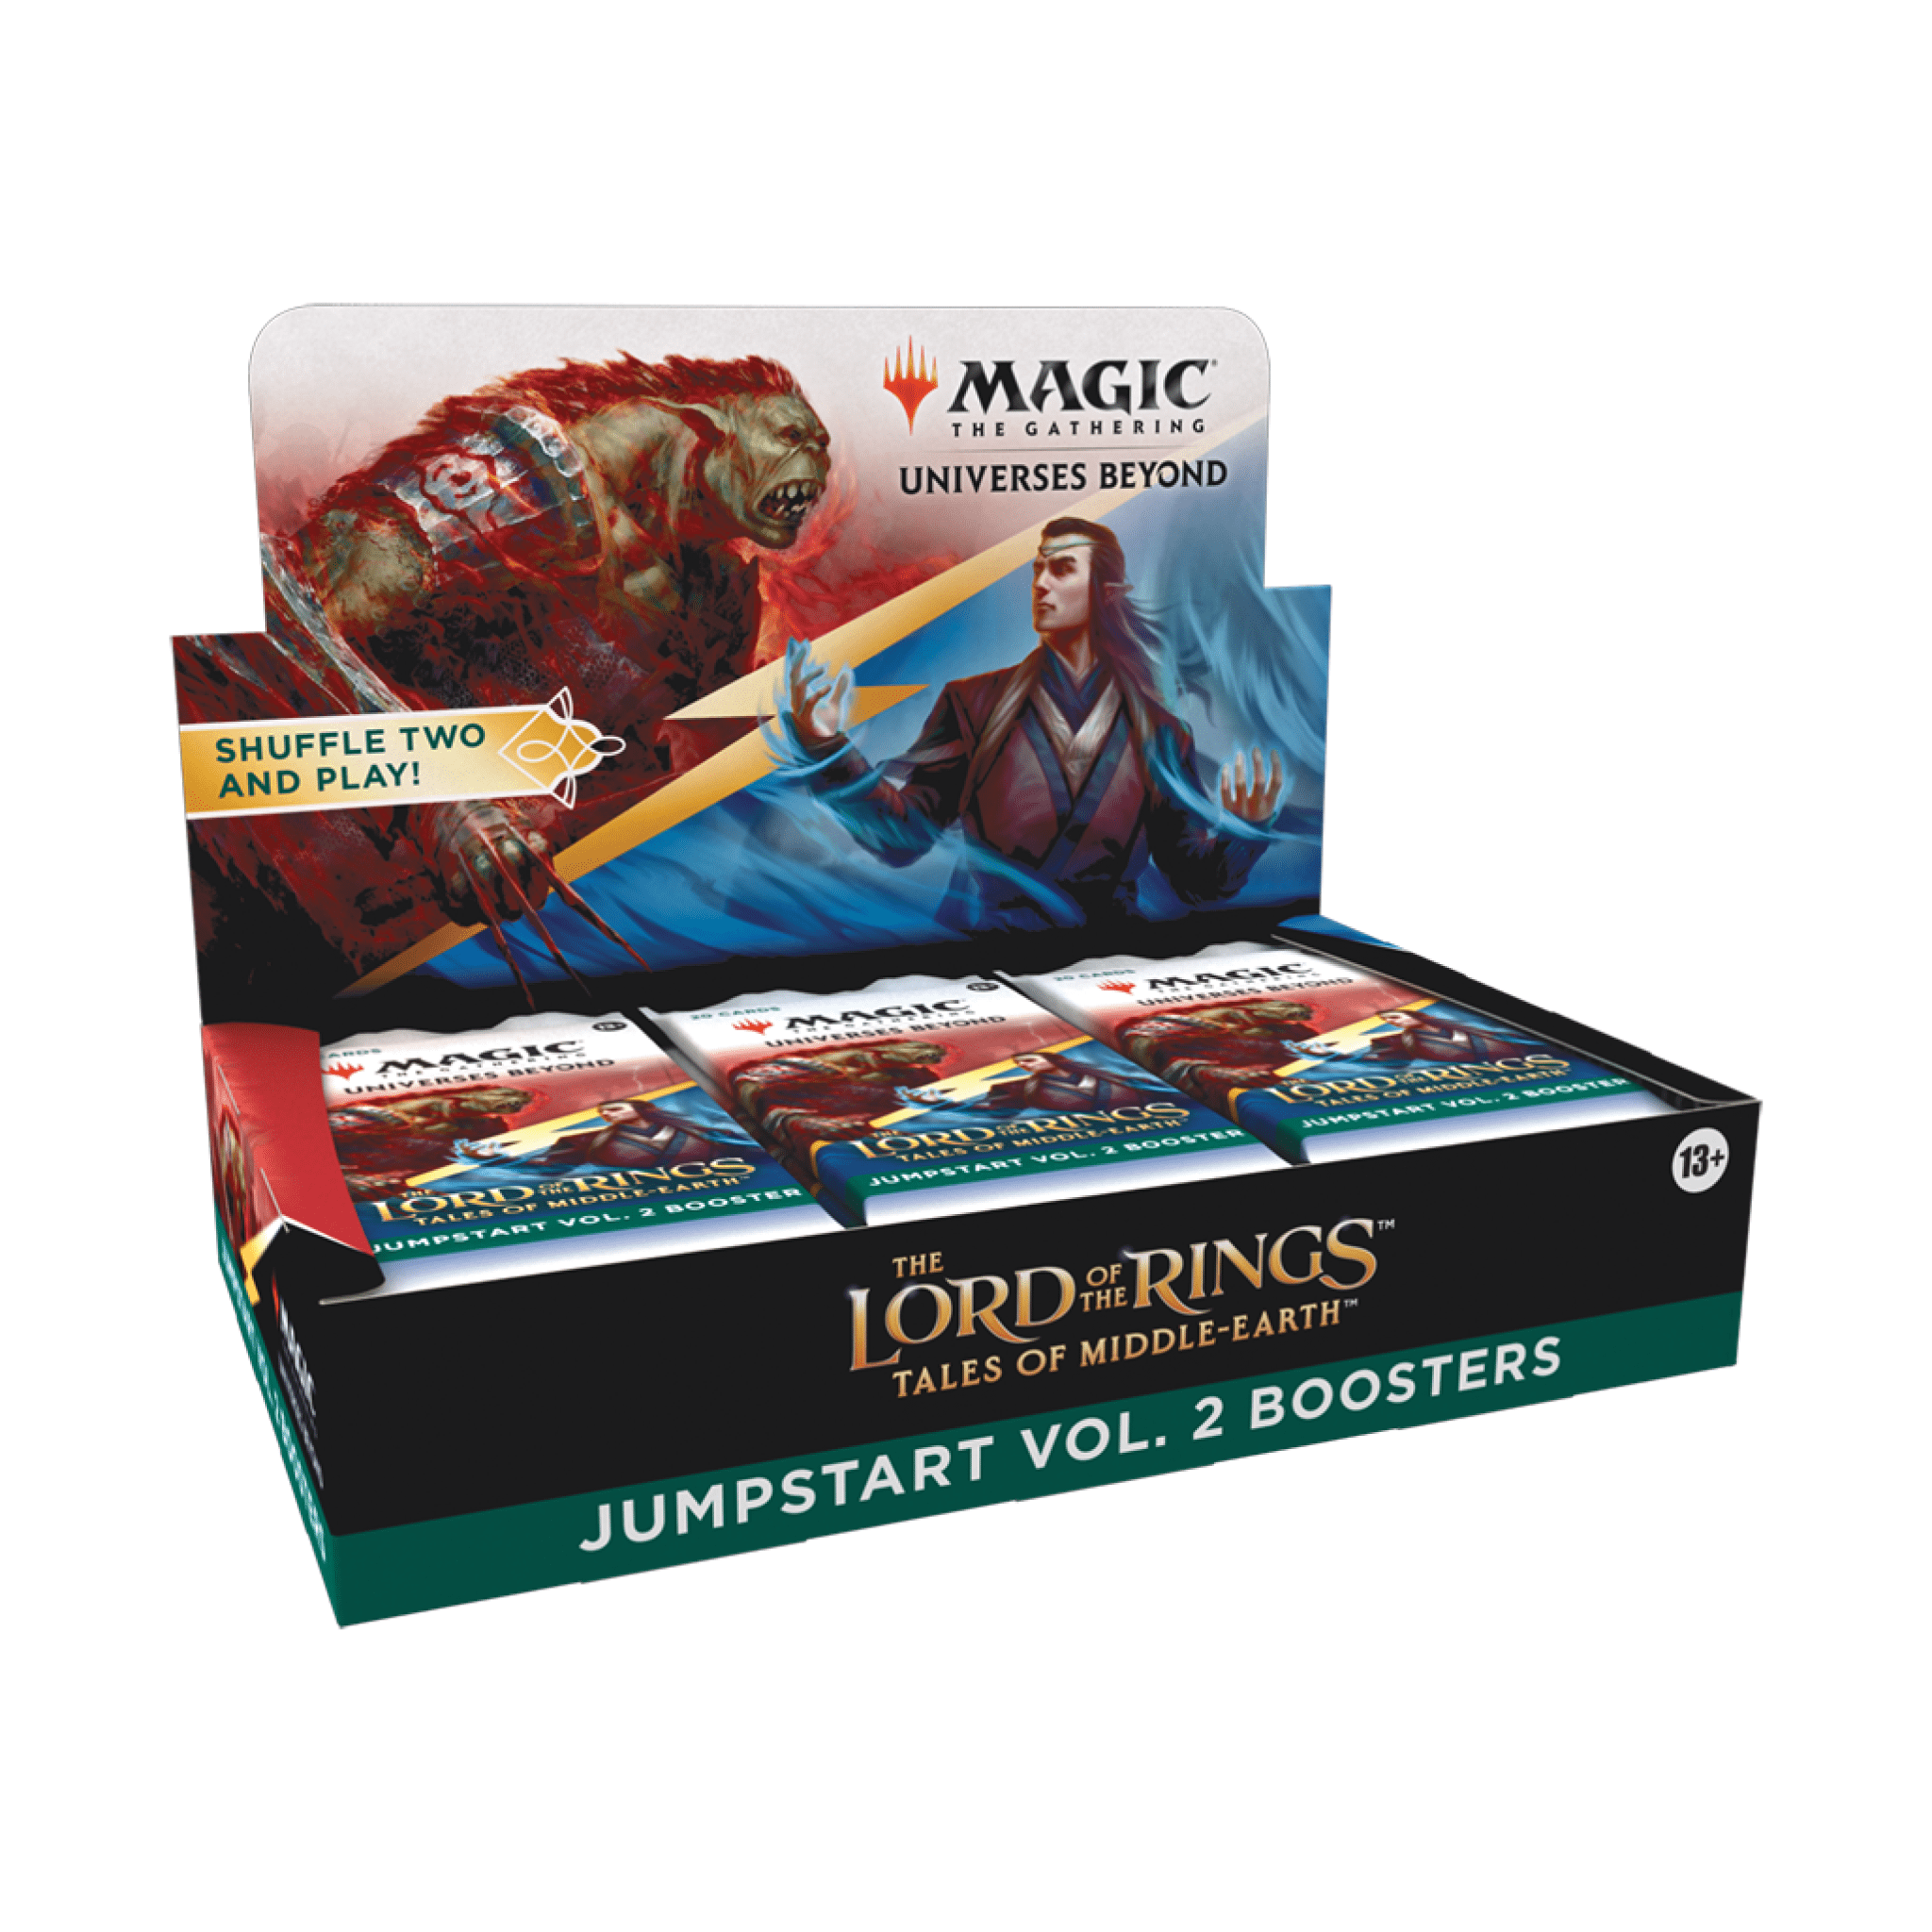 Magic The Gathering - The Lord Of The Rings: Tales Of Middle-Earth Jumpstart Vol. 2 Booster Display 18 Buste (ENG) - Otakura.com